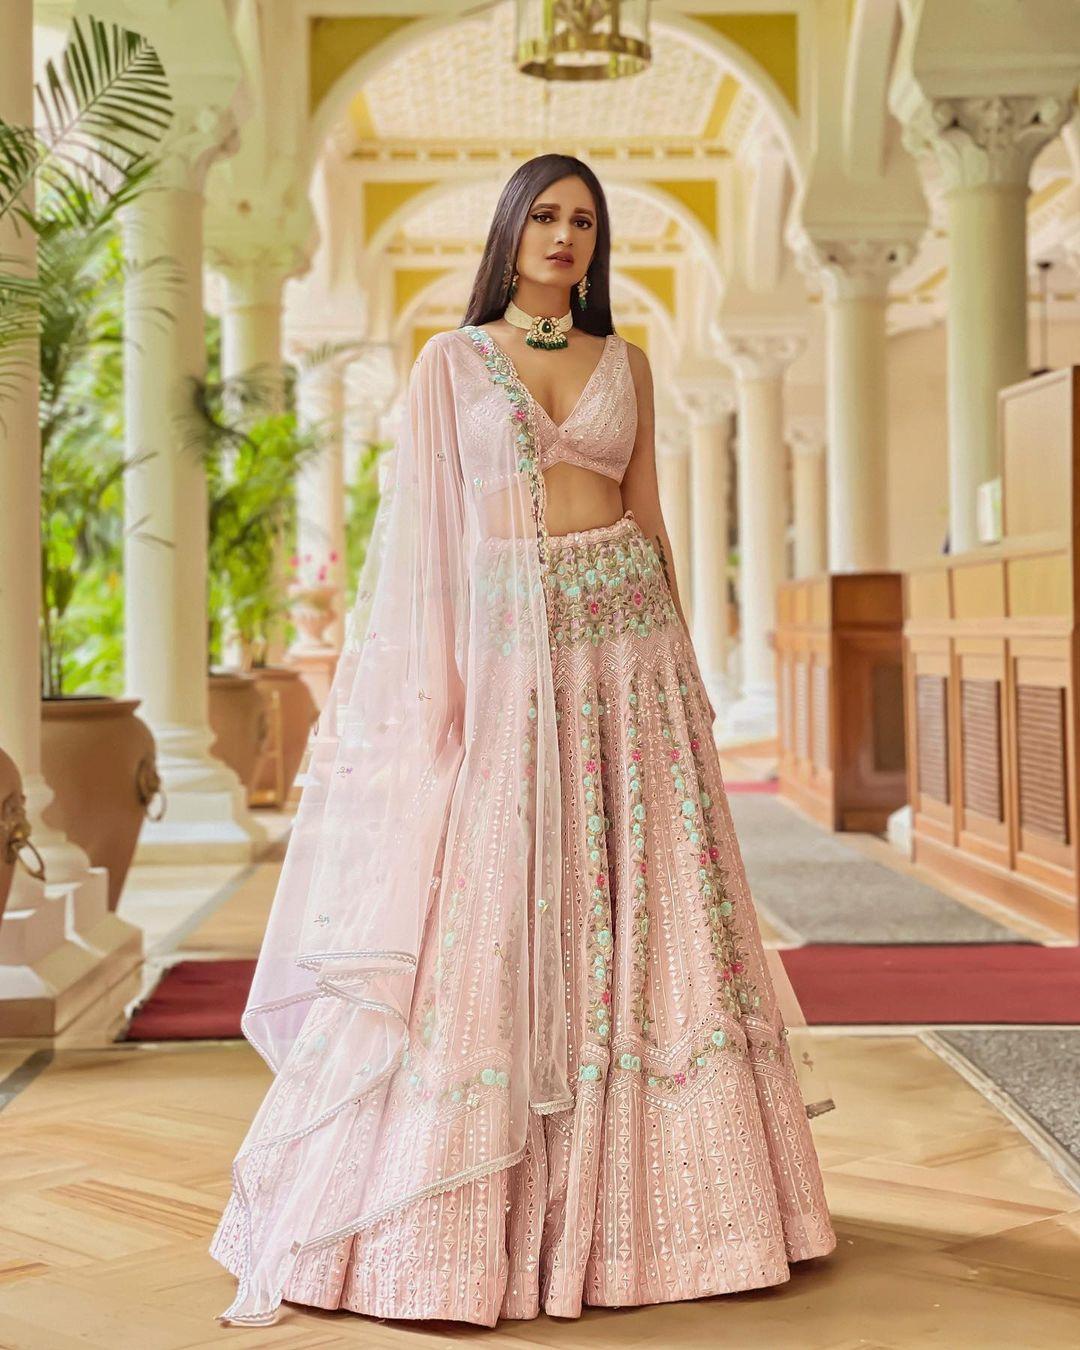 Featuring pink and purple bridal lehenga set with heavy intricate golden  thread embroidery on top, back… | Indian wedding dress, Indian dresses, Pink  bridal lehenga